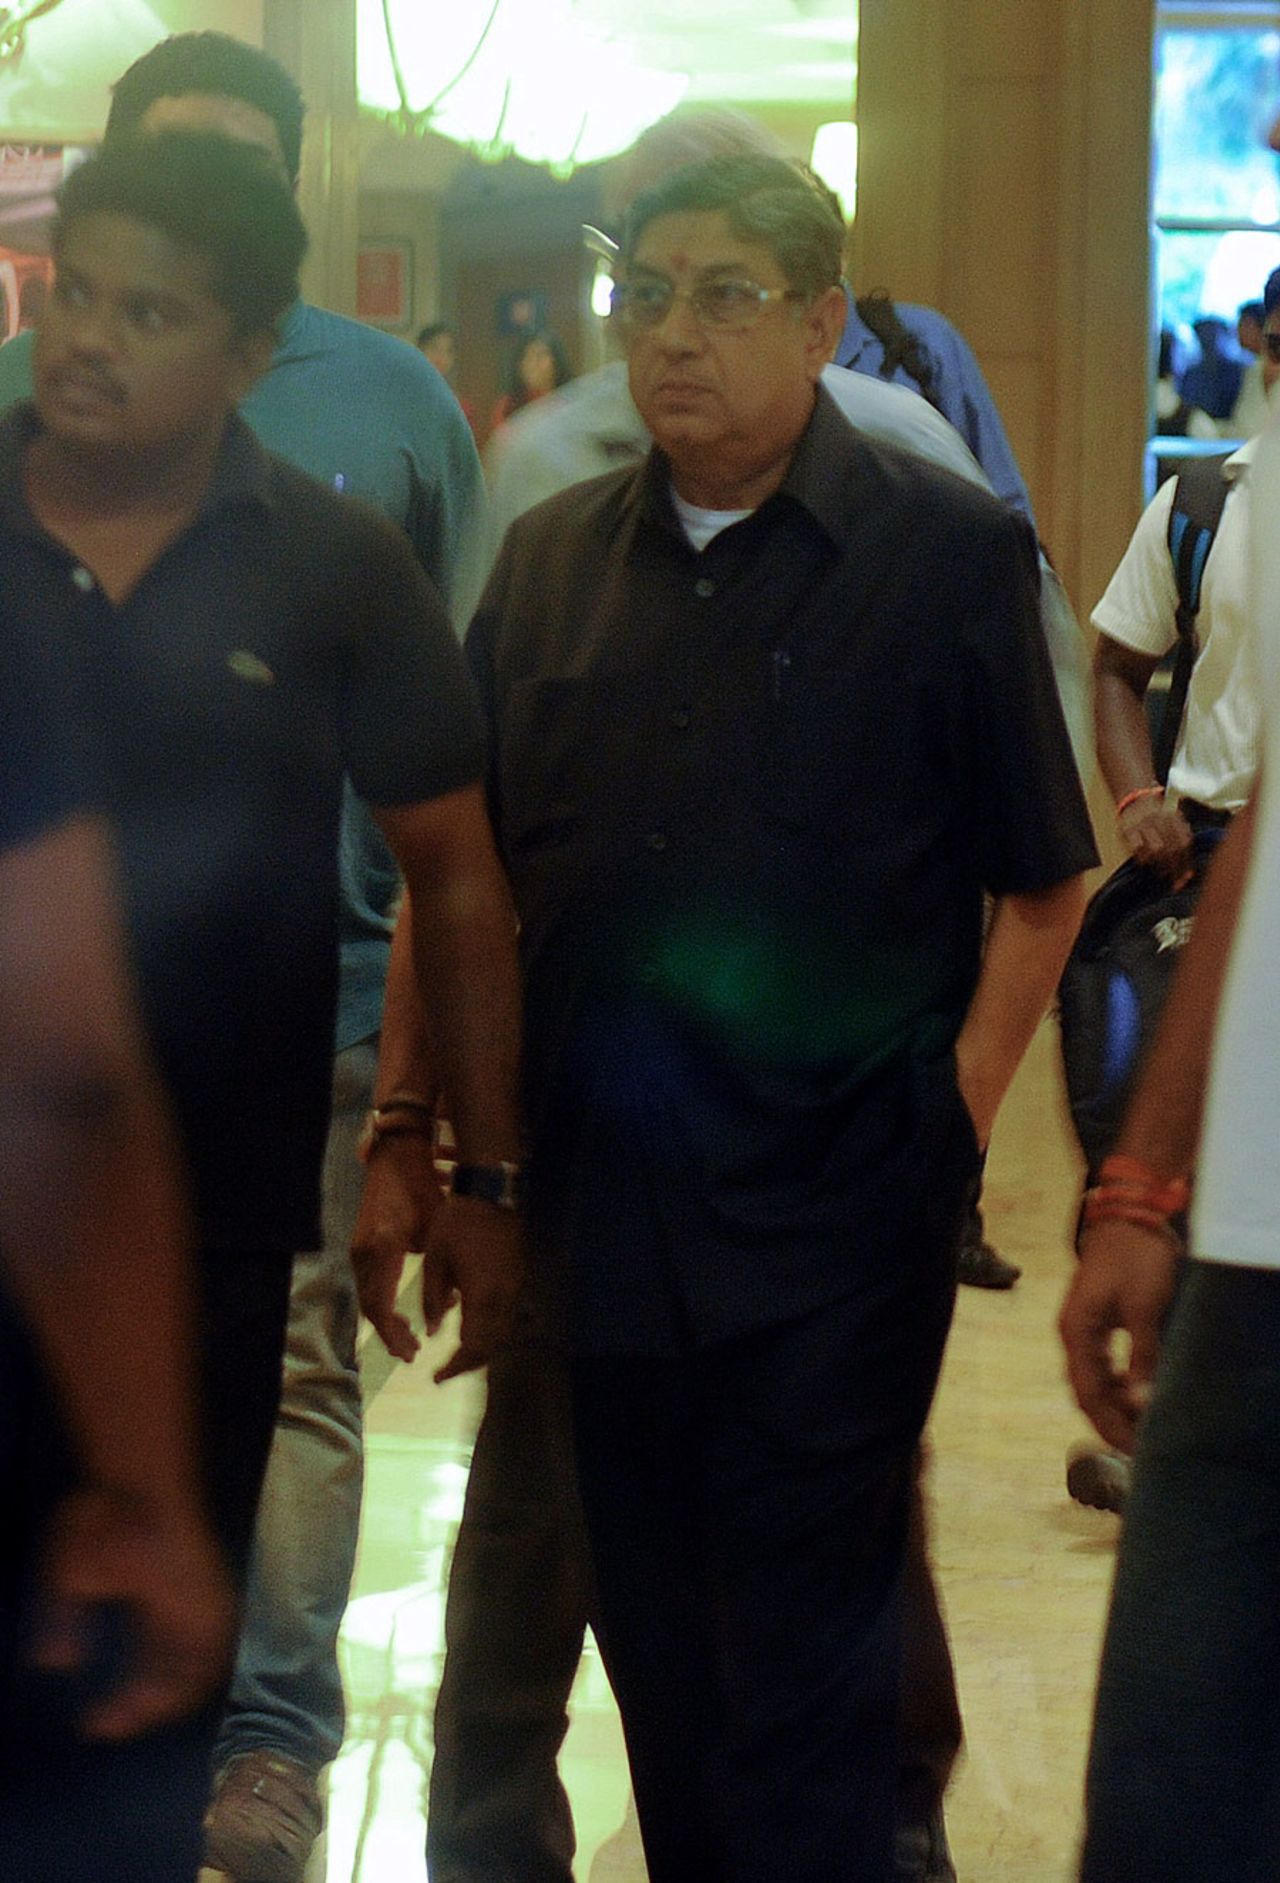 N Srinivasan leaves after the BCCI meeting held in Chennai, June 2, 2013